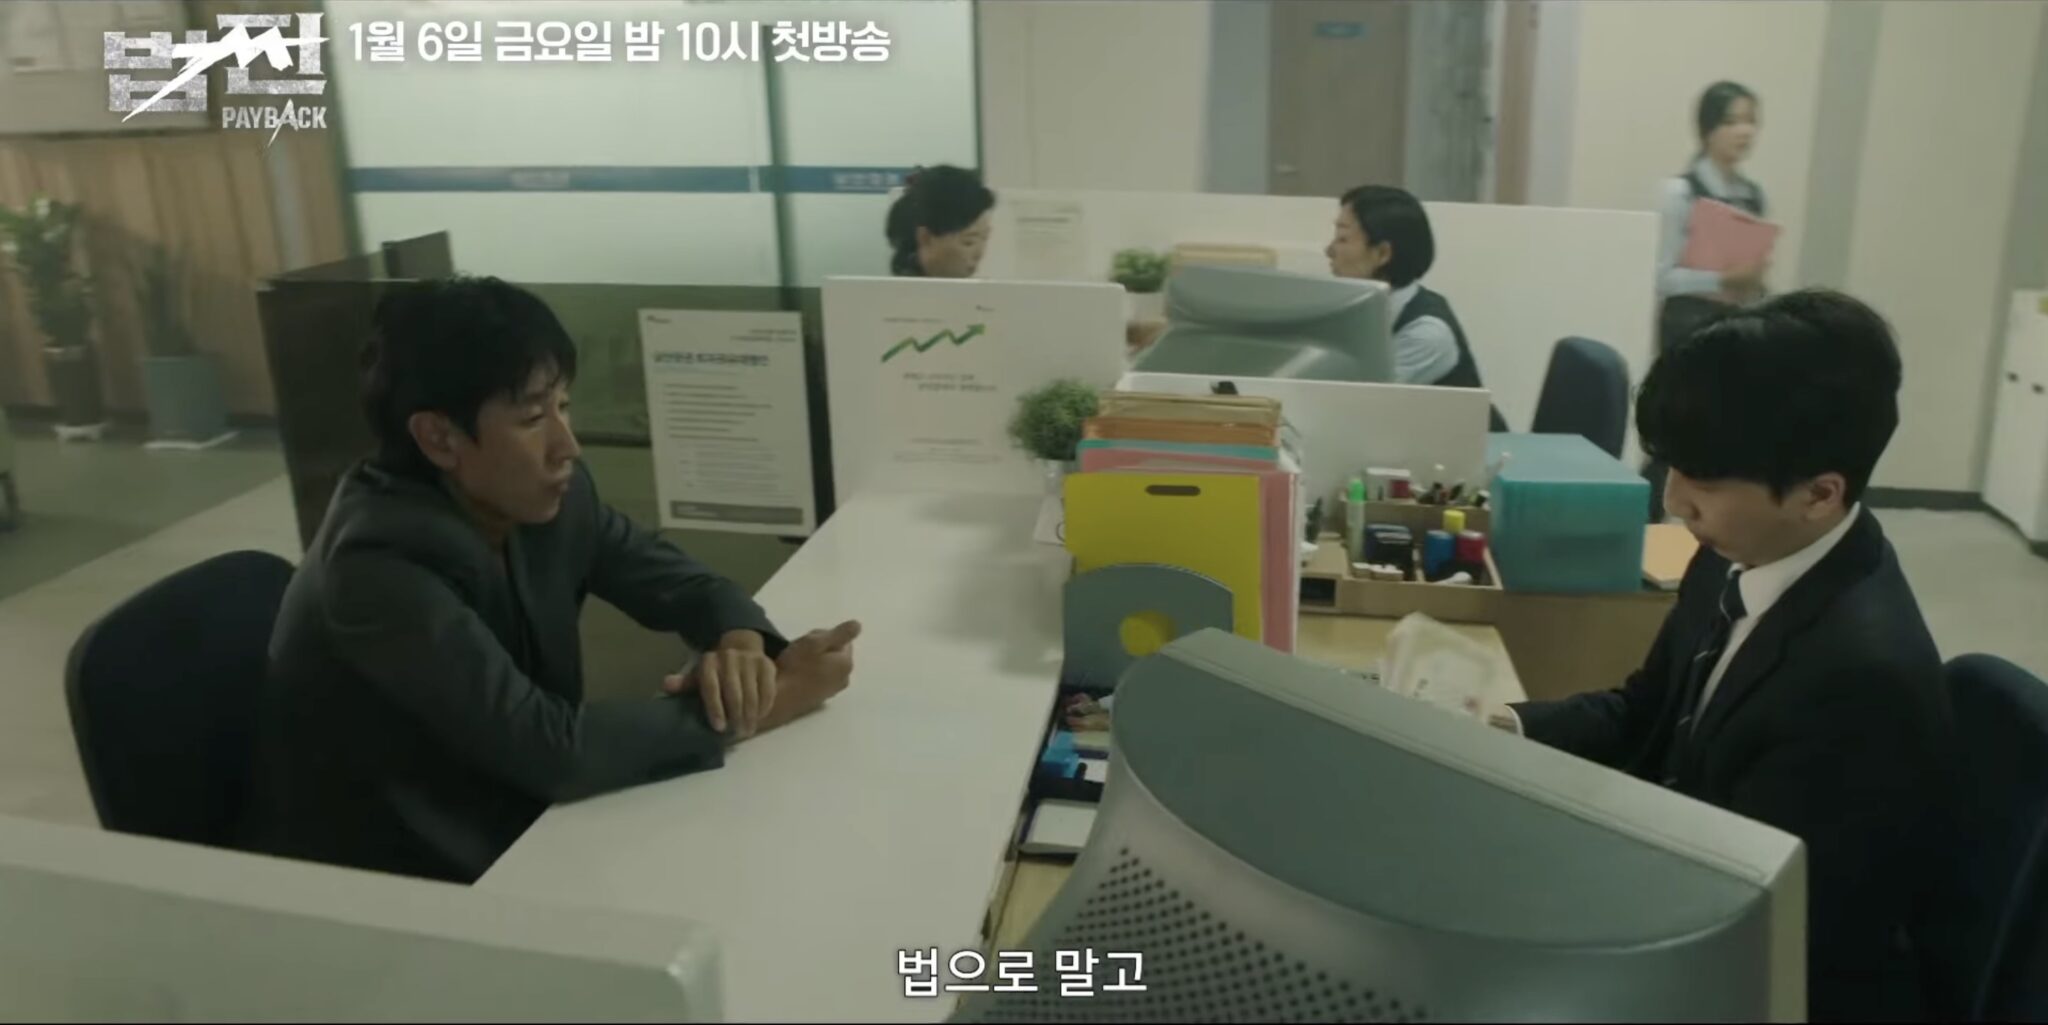 Lee Seon-kyun masterminds a stock market heist in Payback